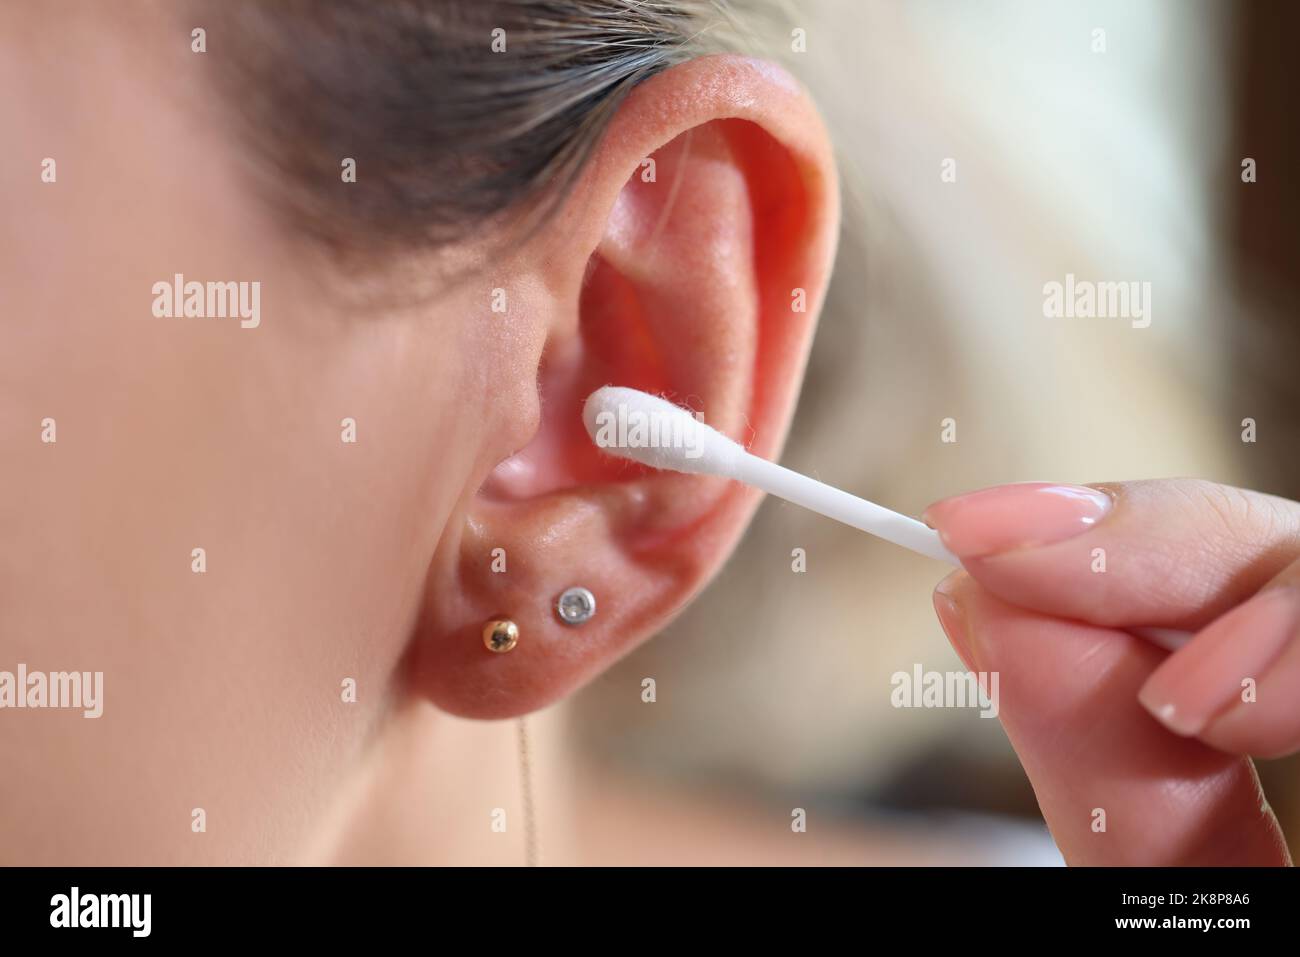 Woman cleaning ears and using cotton bud Stock Photo